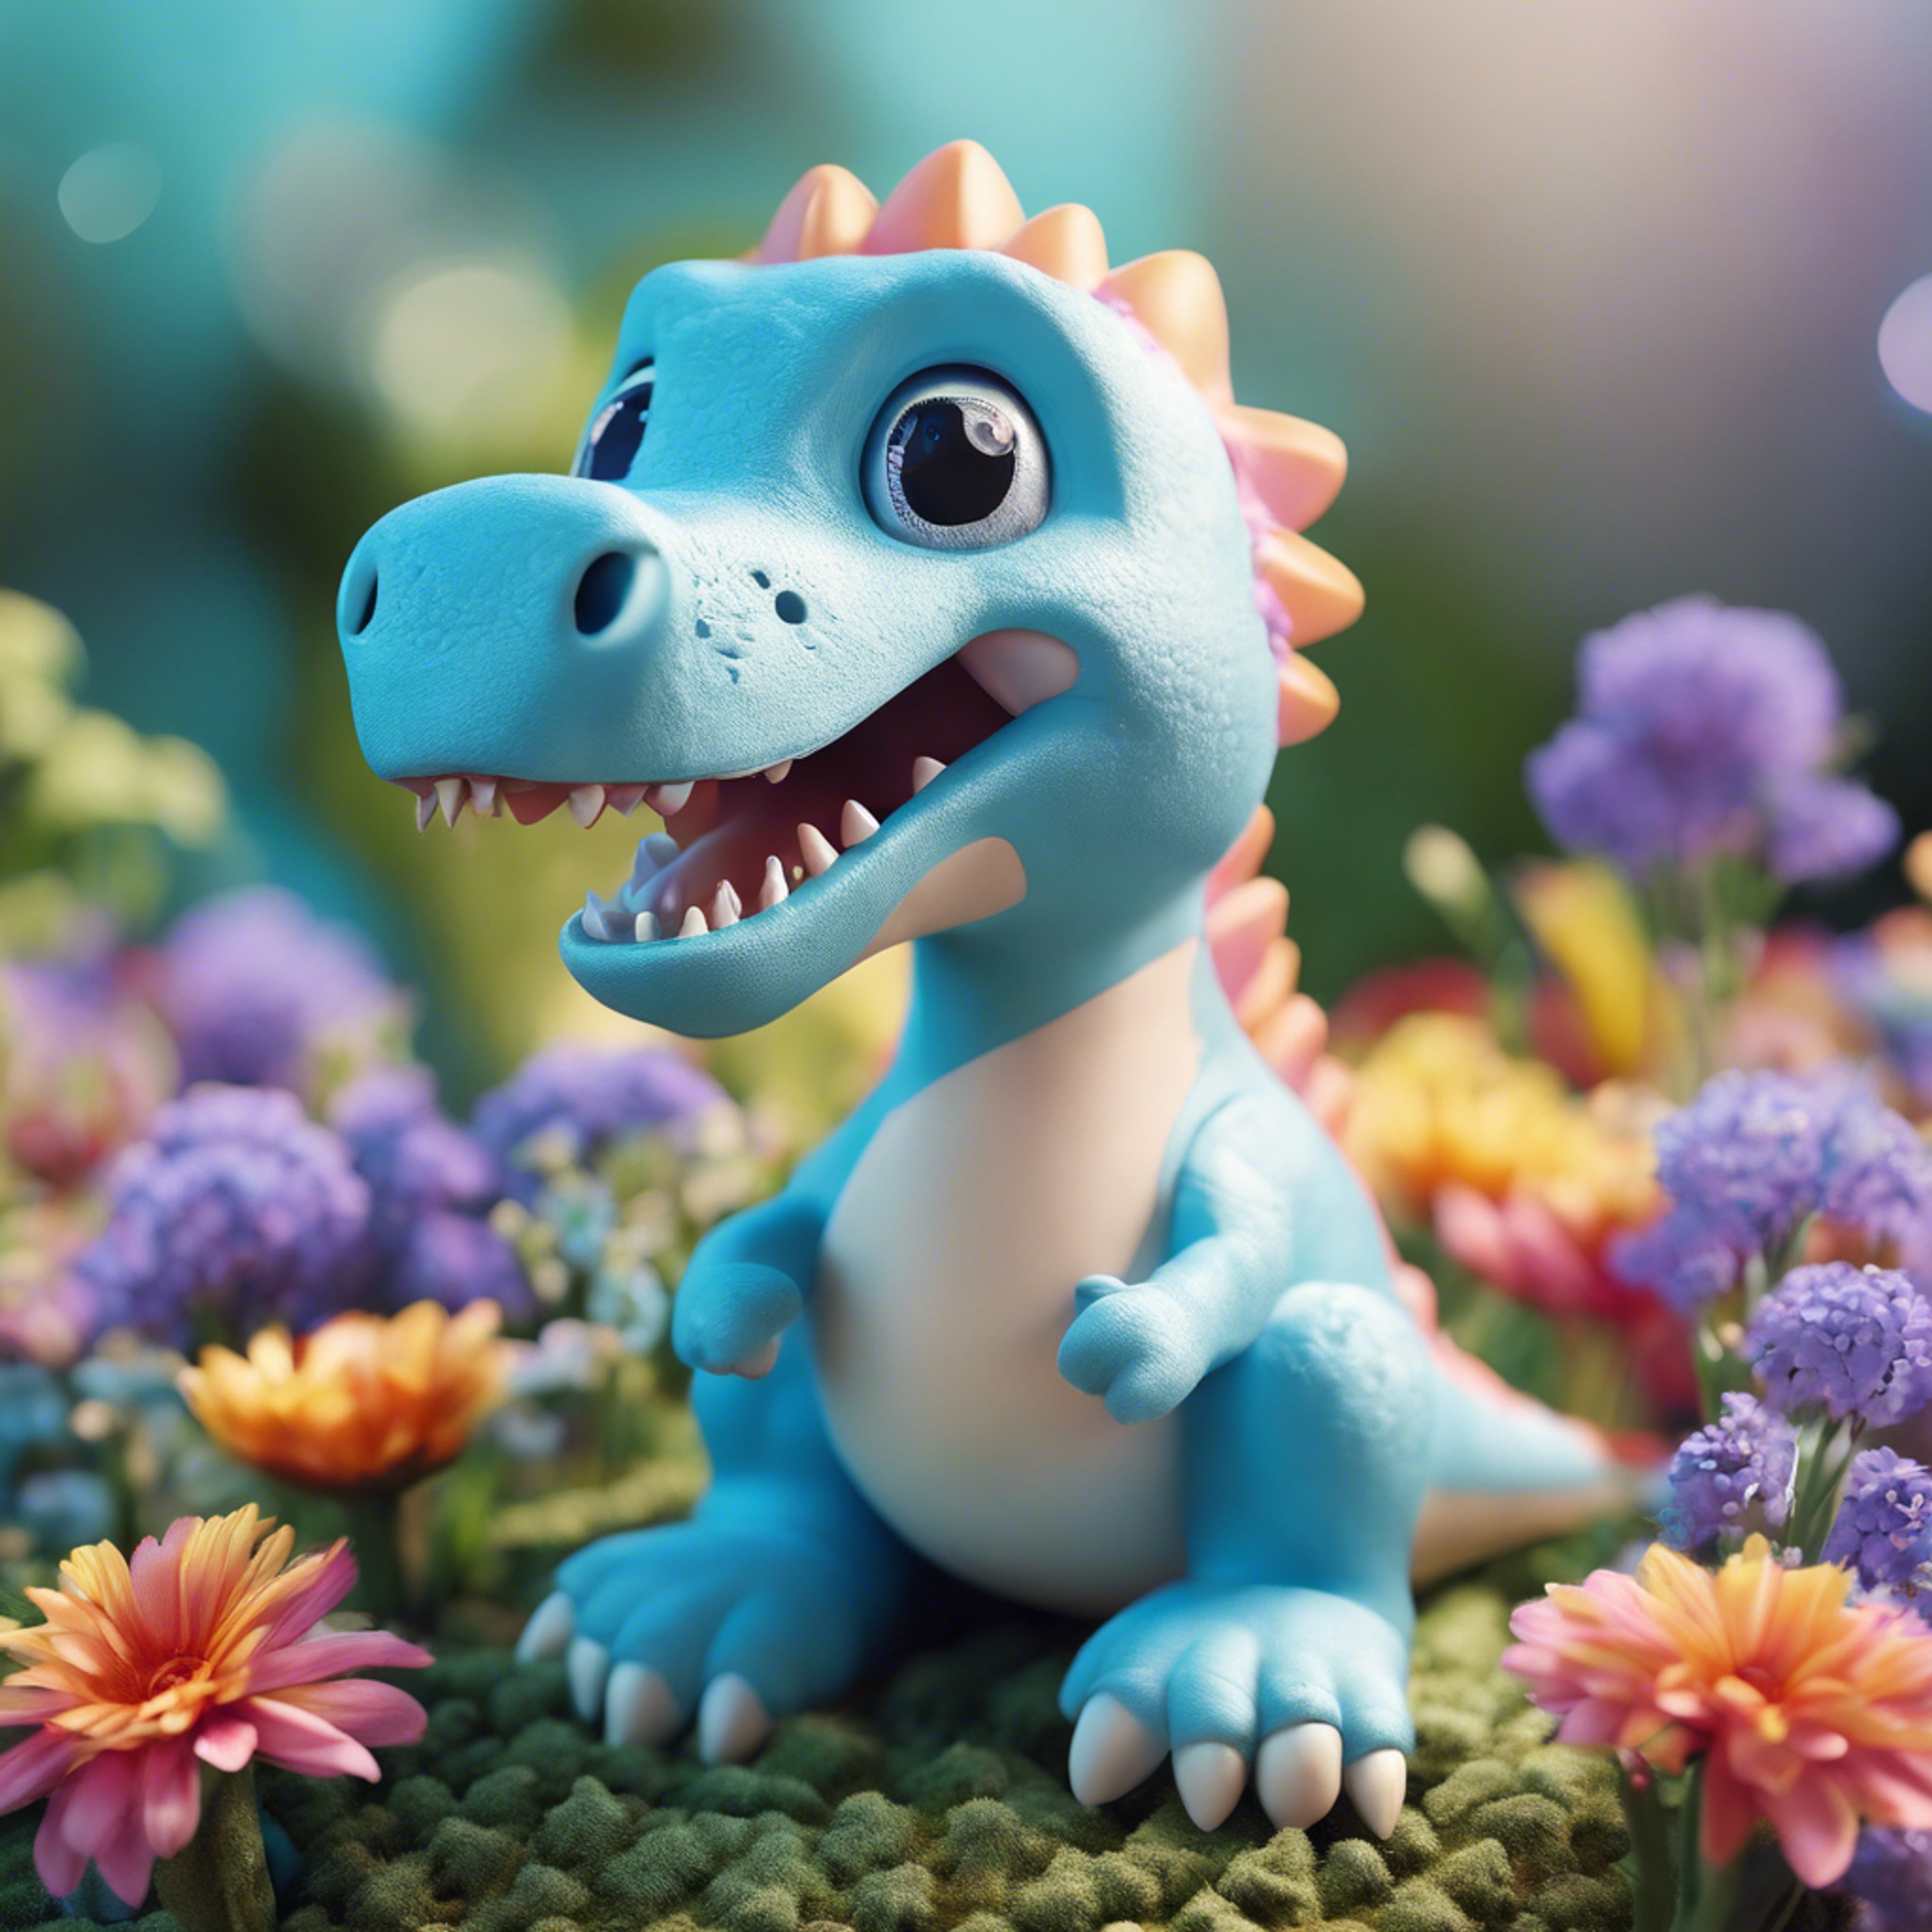 A cute light blue dinosaur with a kawaii expression, surrounded by brightly colored flowers. Tapet[445e6142c59b4fa2886e]